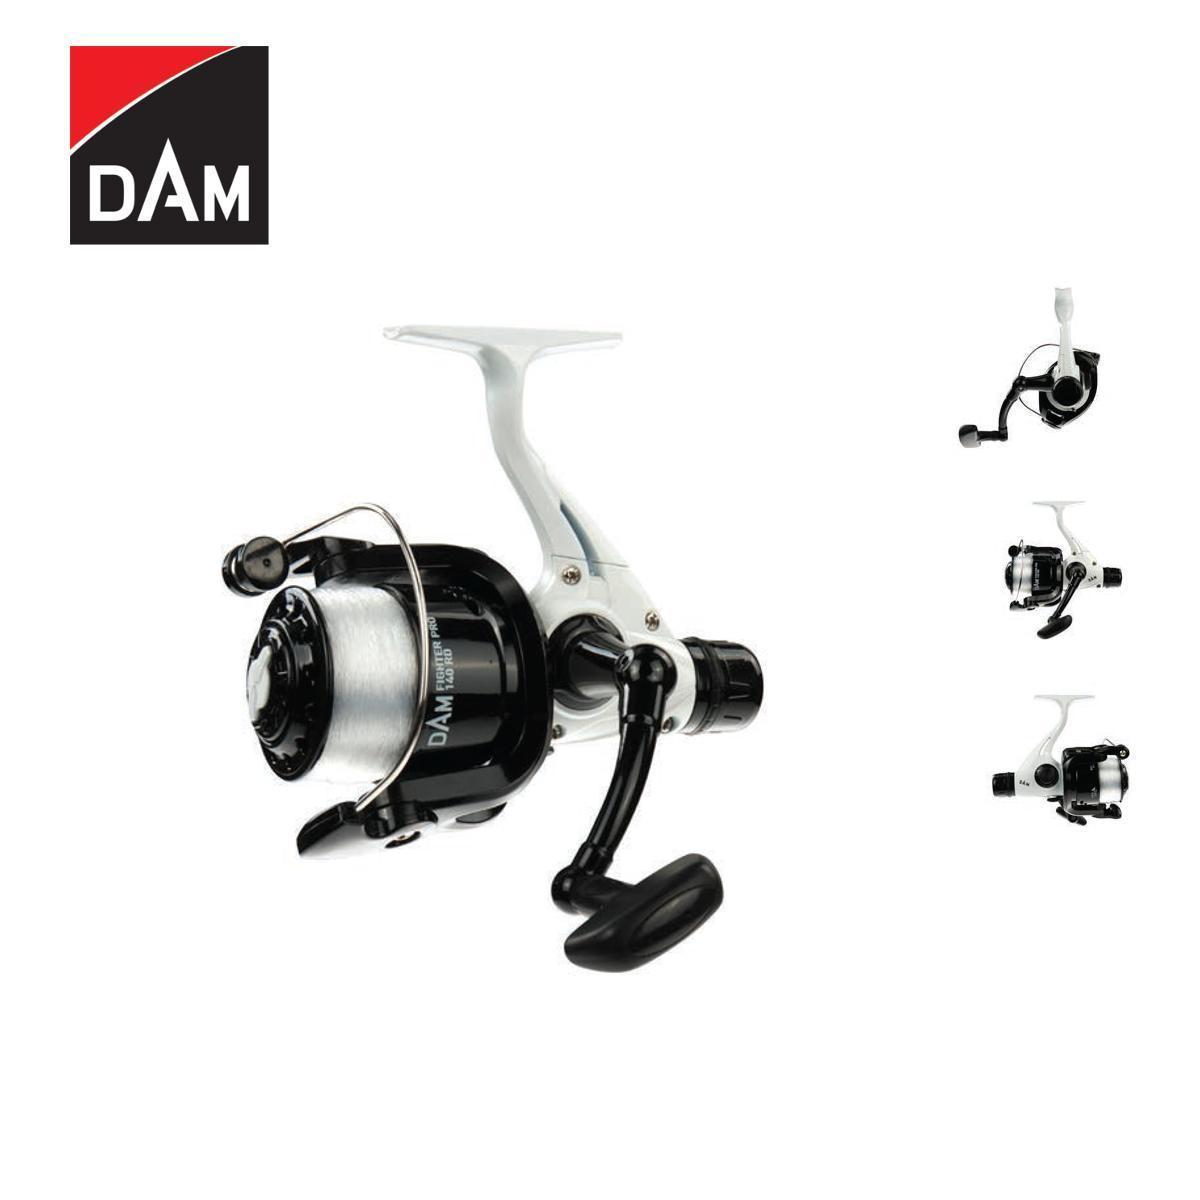 DAM Quick Fighter Pro RD